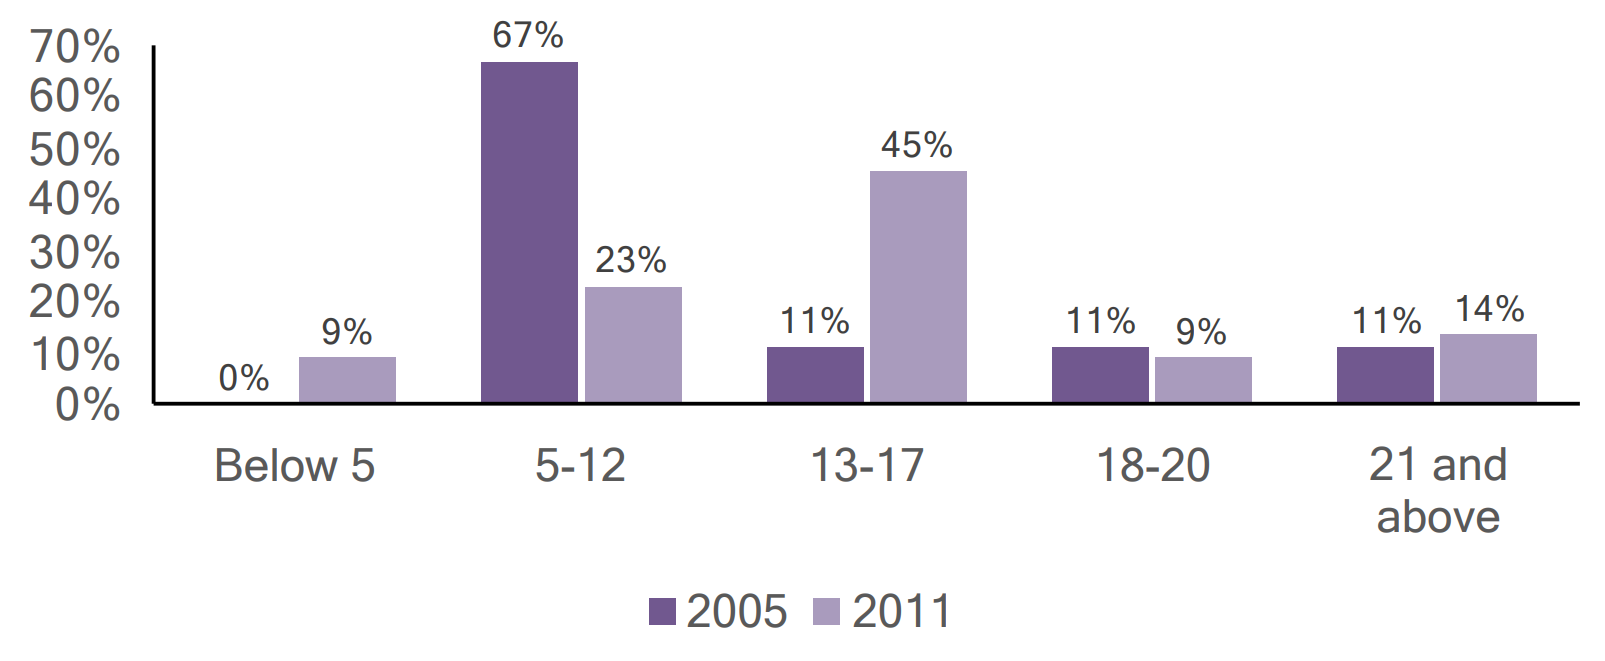 Bar graph of individuals with autism in Forest county by age, comparing 2005 and 2011 data.